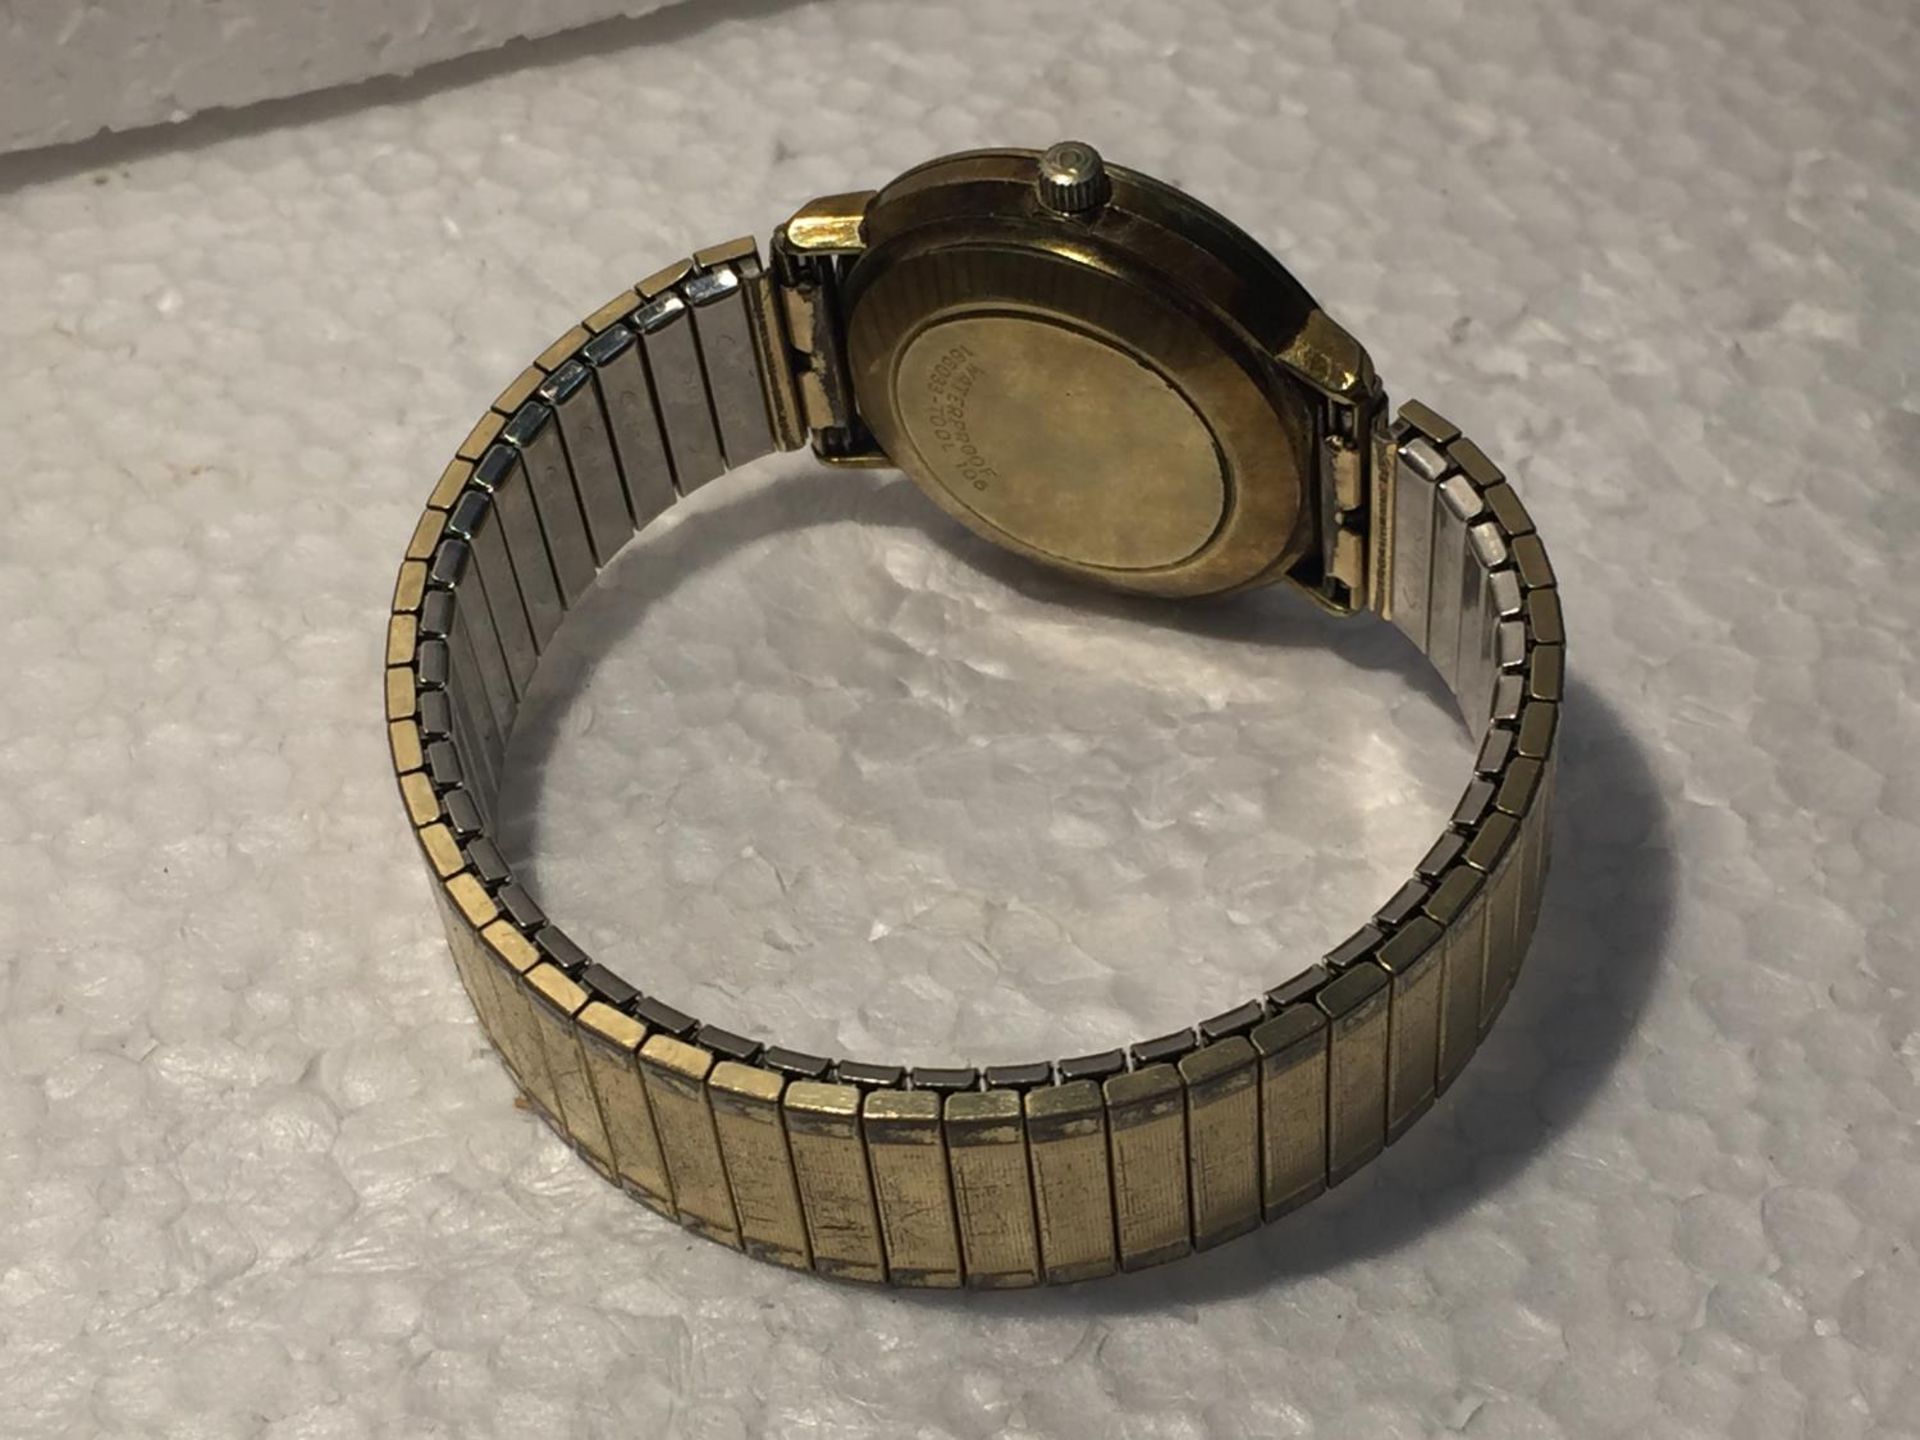 A VINTAGE OMEGA AUTOMATIC DE VILLE WATCH POSSIBLY 9CT GOLD WRIST WATCH IN WORKING ORDER WHEN - Image 4 of 7